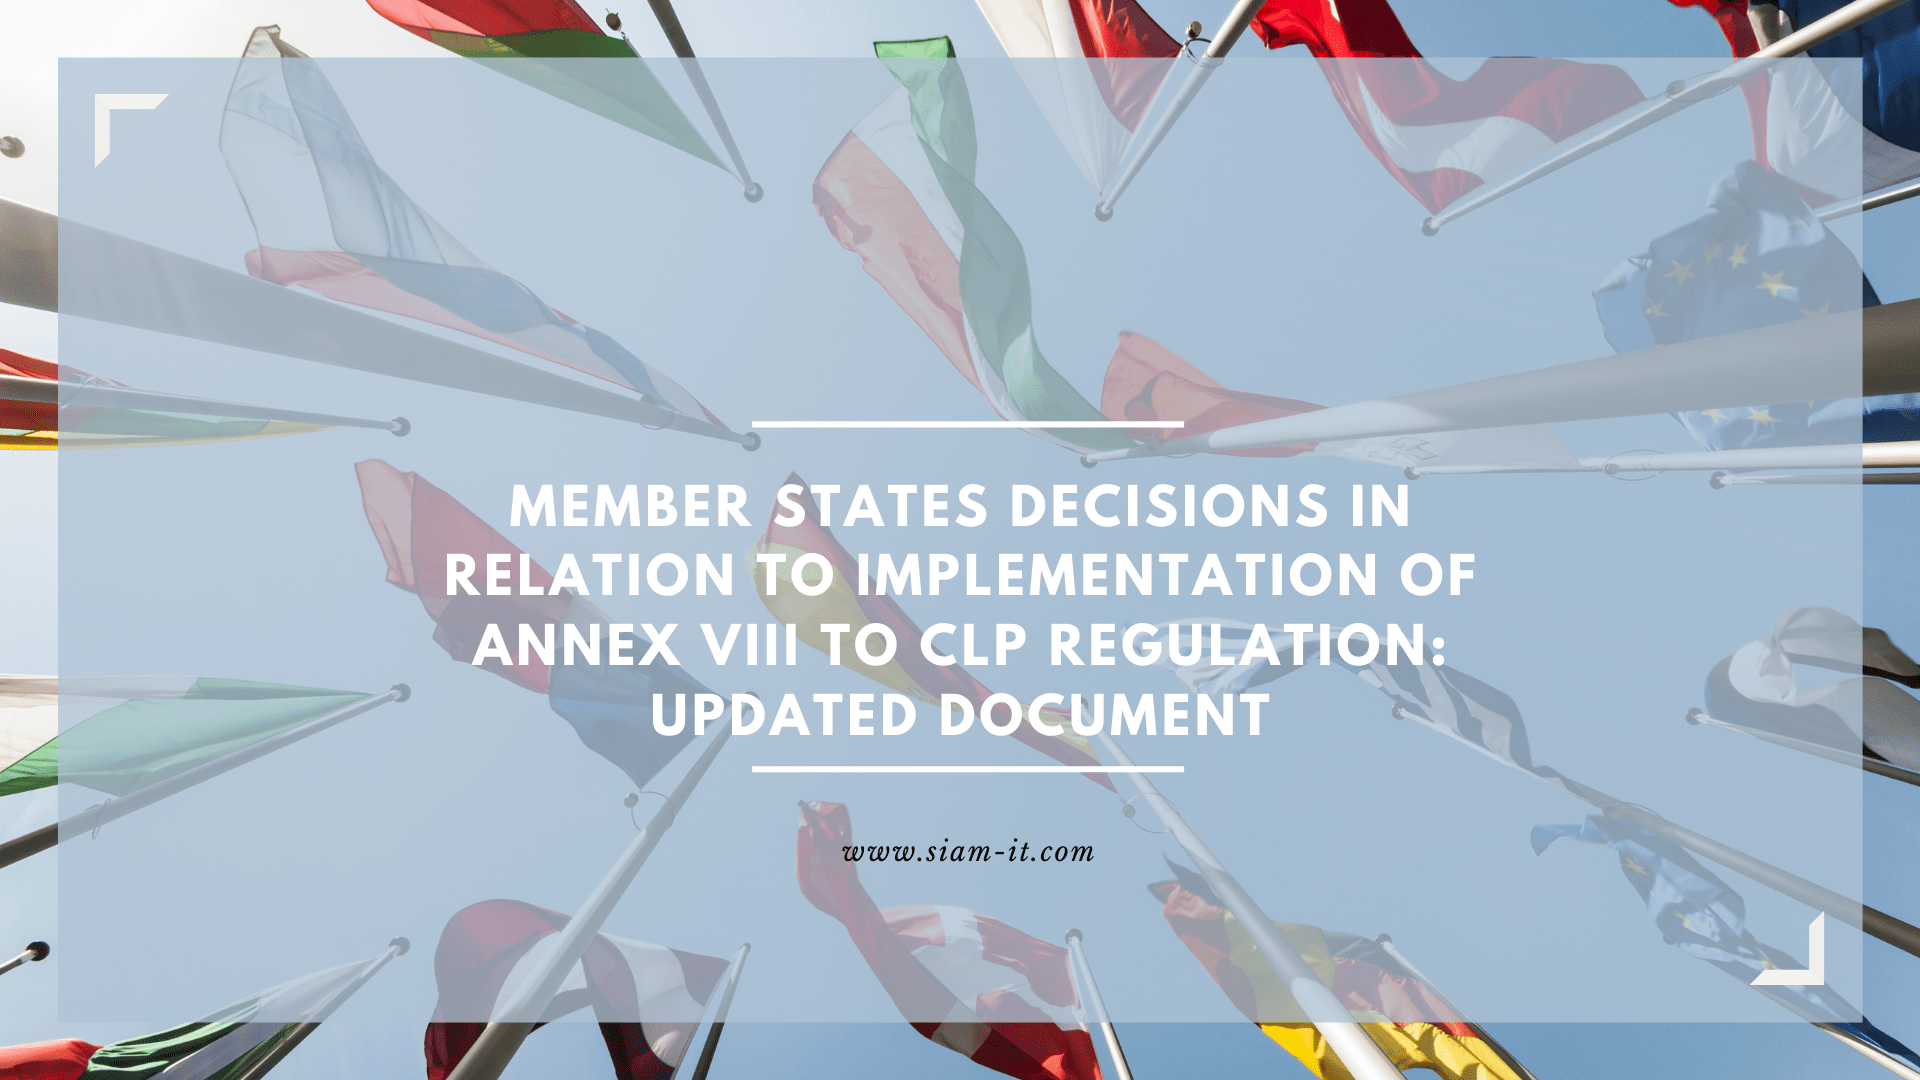 Member States decisions in relation to implementation of Annex VIII to CLP Regulation: updated document